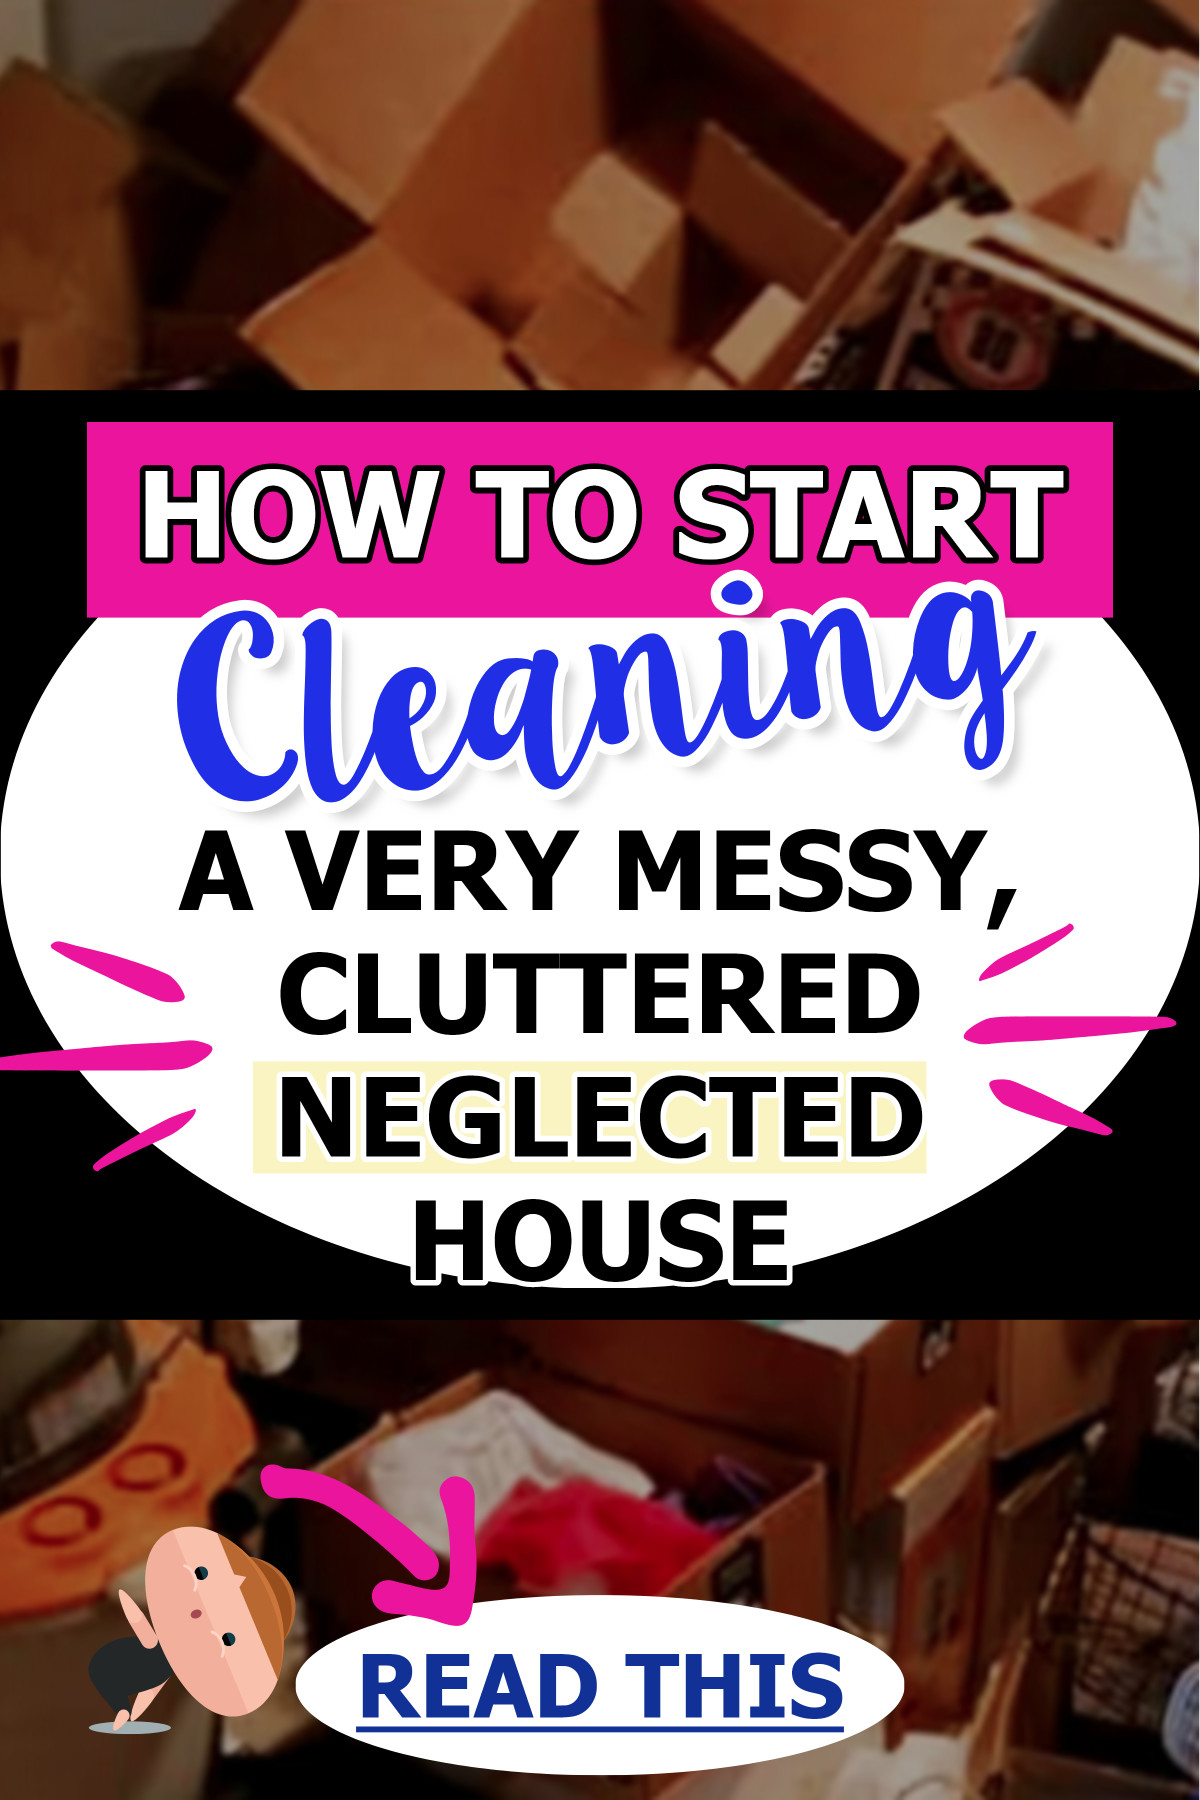 How To Start Cleaning A Messy, Cluttered Neglected House